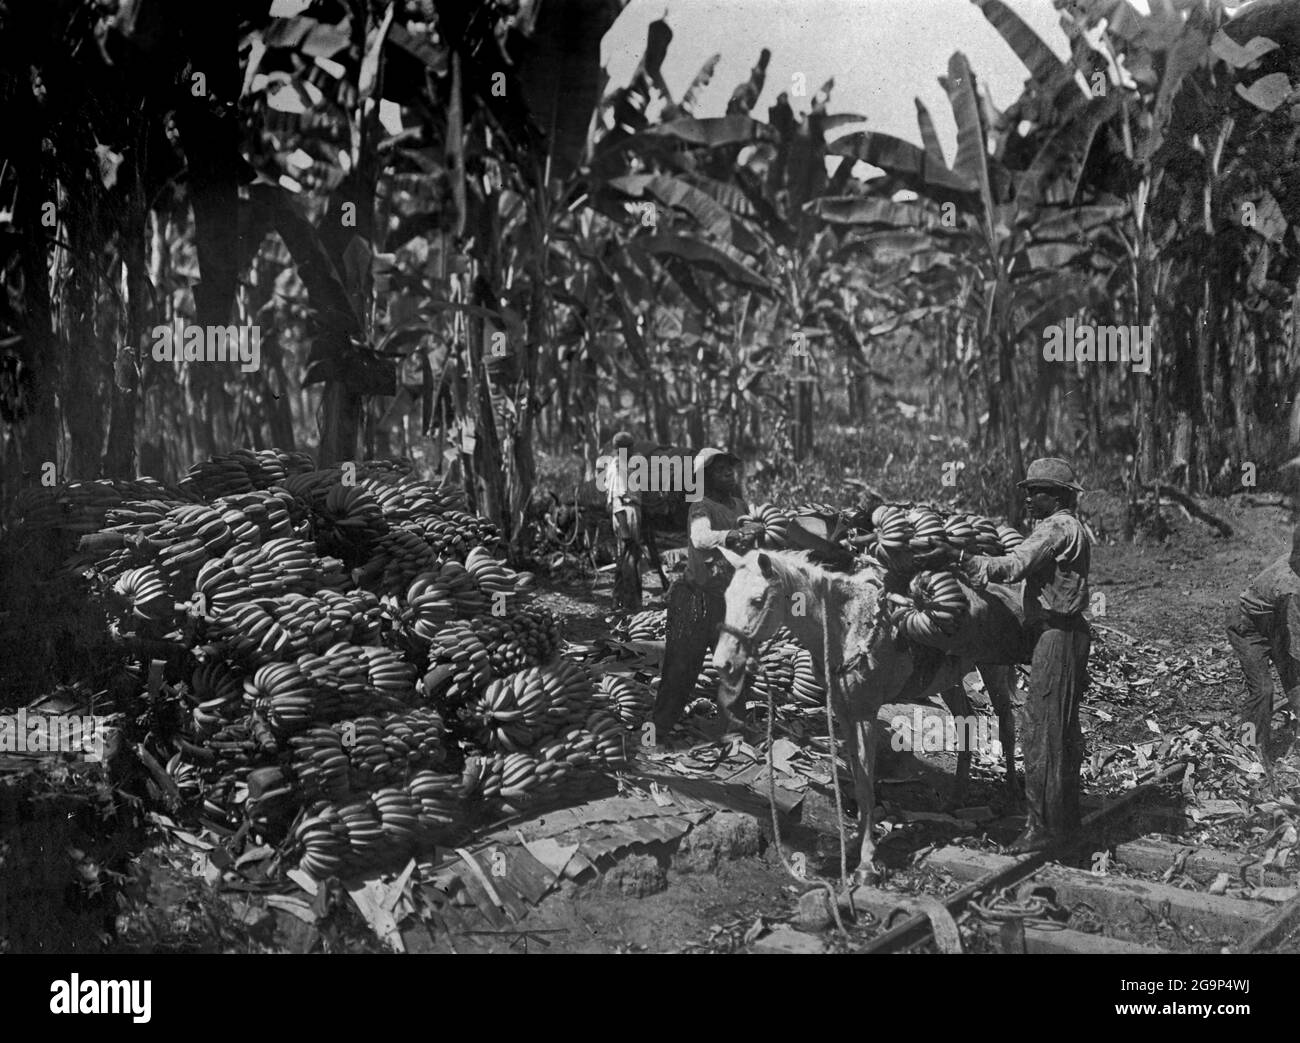 COSTA RICA - circa 1908-1919 - Plantation workers unload bushels of bananas ready to be loaded onto a cargo train on a banana plantation at an unident Stock Photo